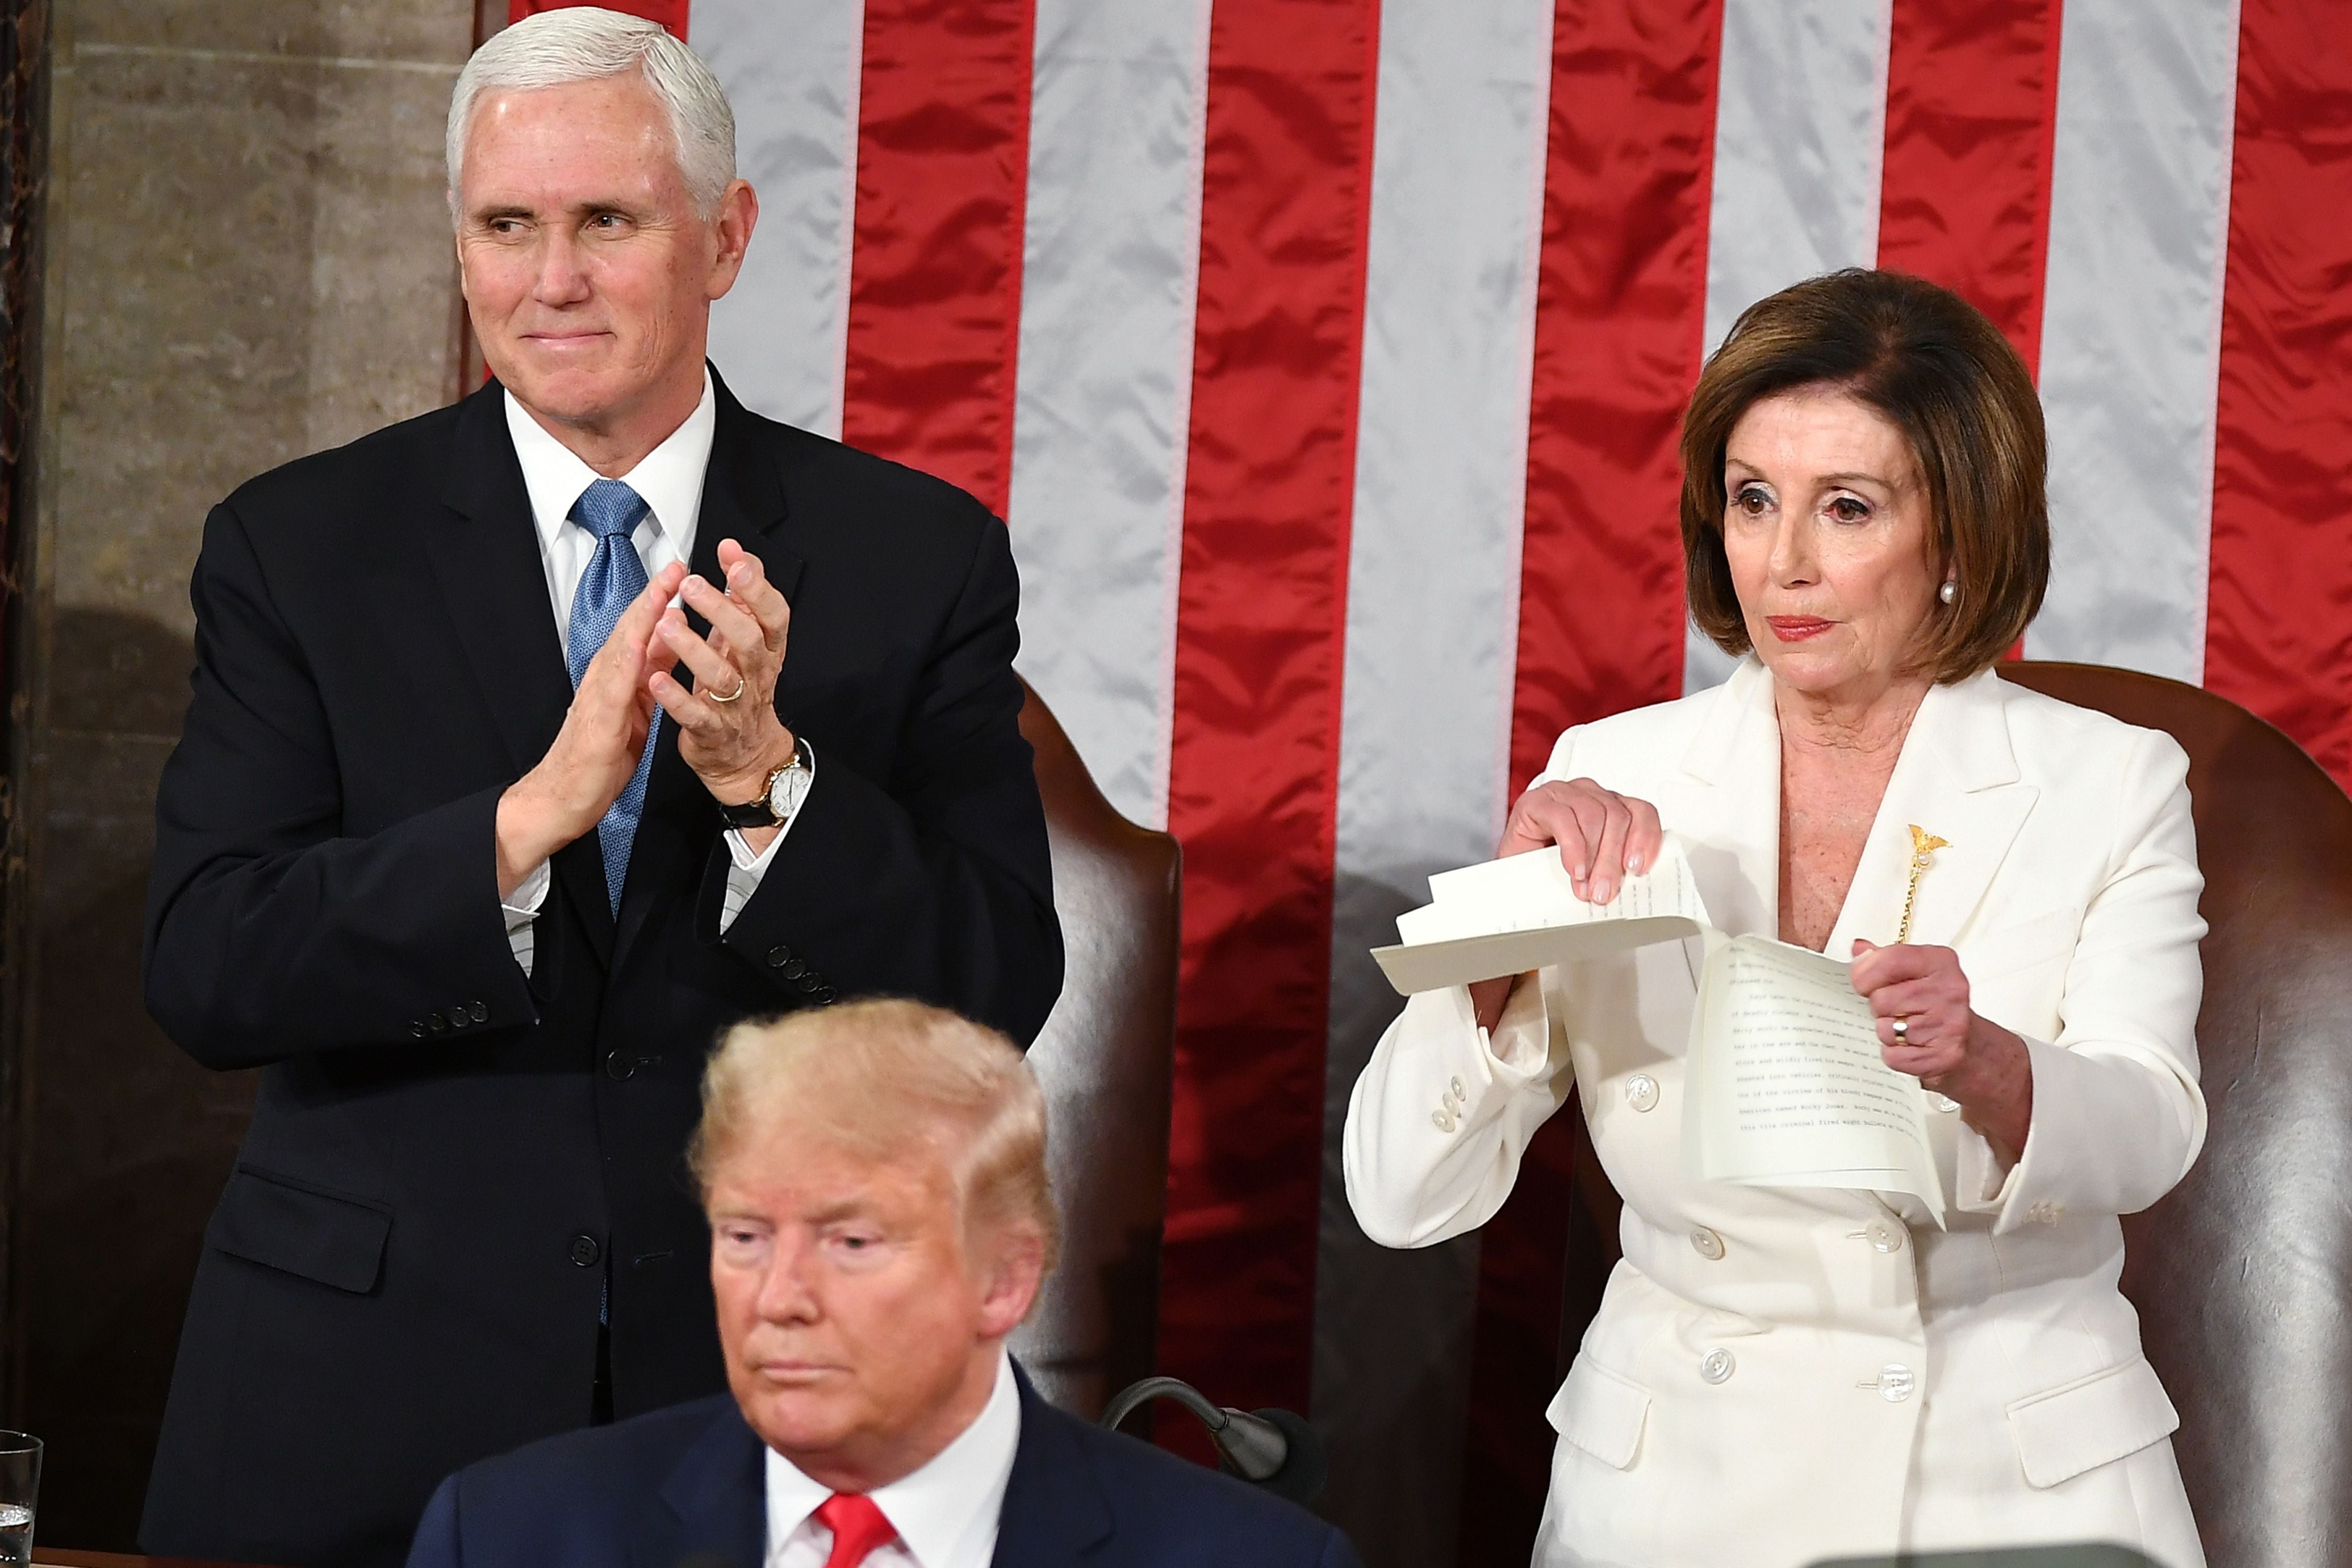 Speaker of the US House of Representatives Nancy Pelosi rips a copy of US President Donald Trumps speech after he delivered the State of the Union address at the US Capitol in Washington, DC, on February 4, 2020